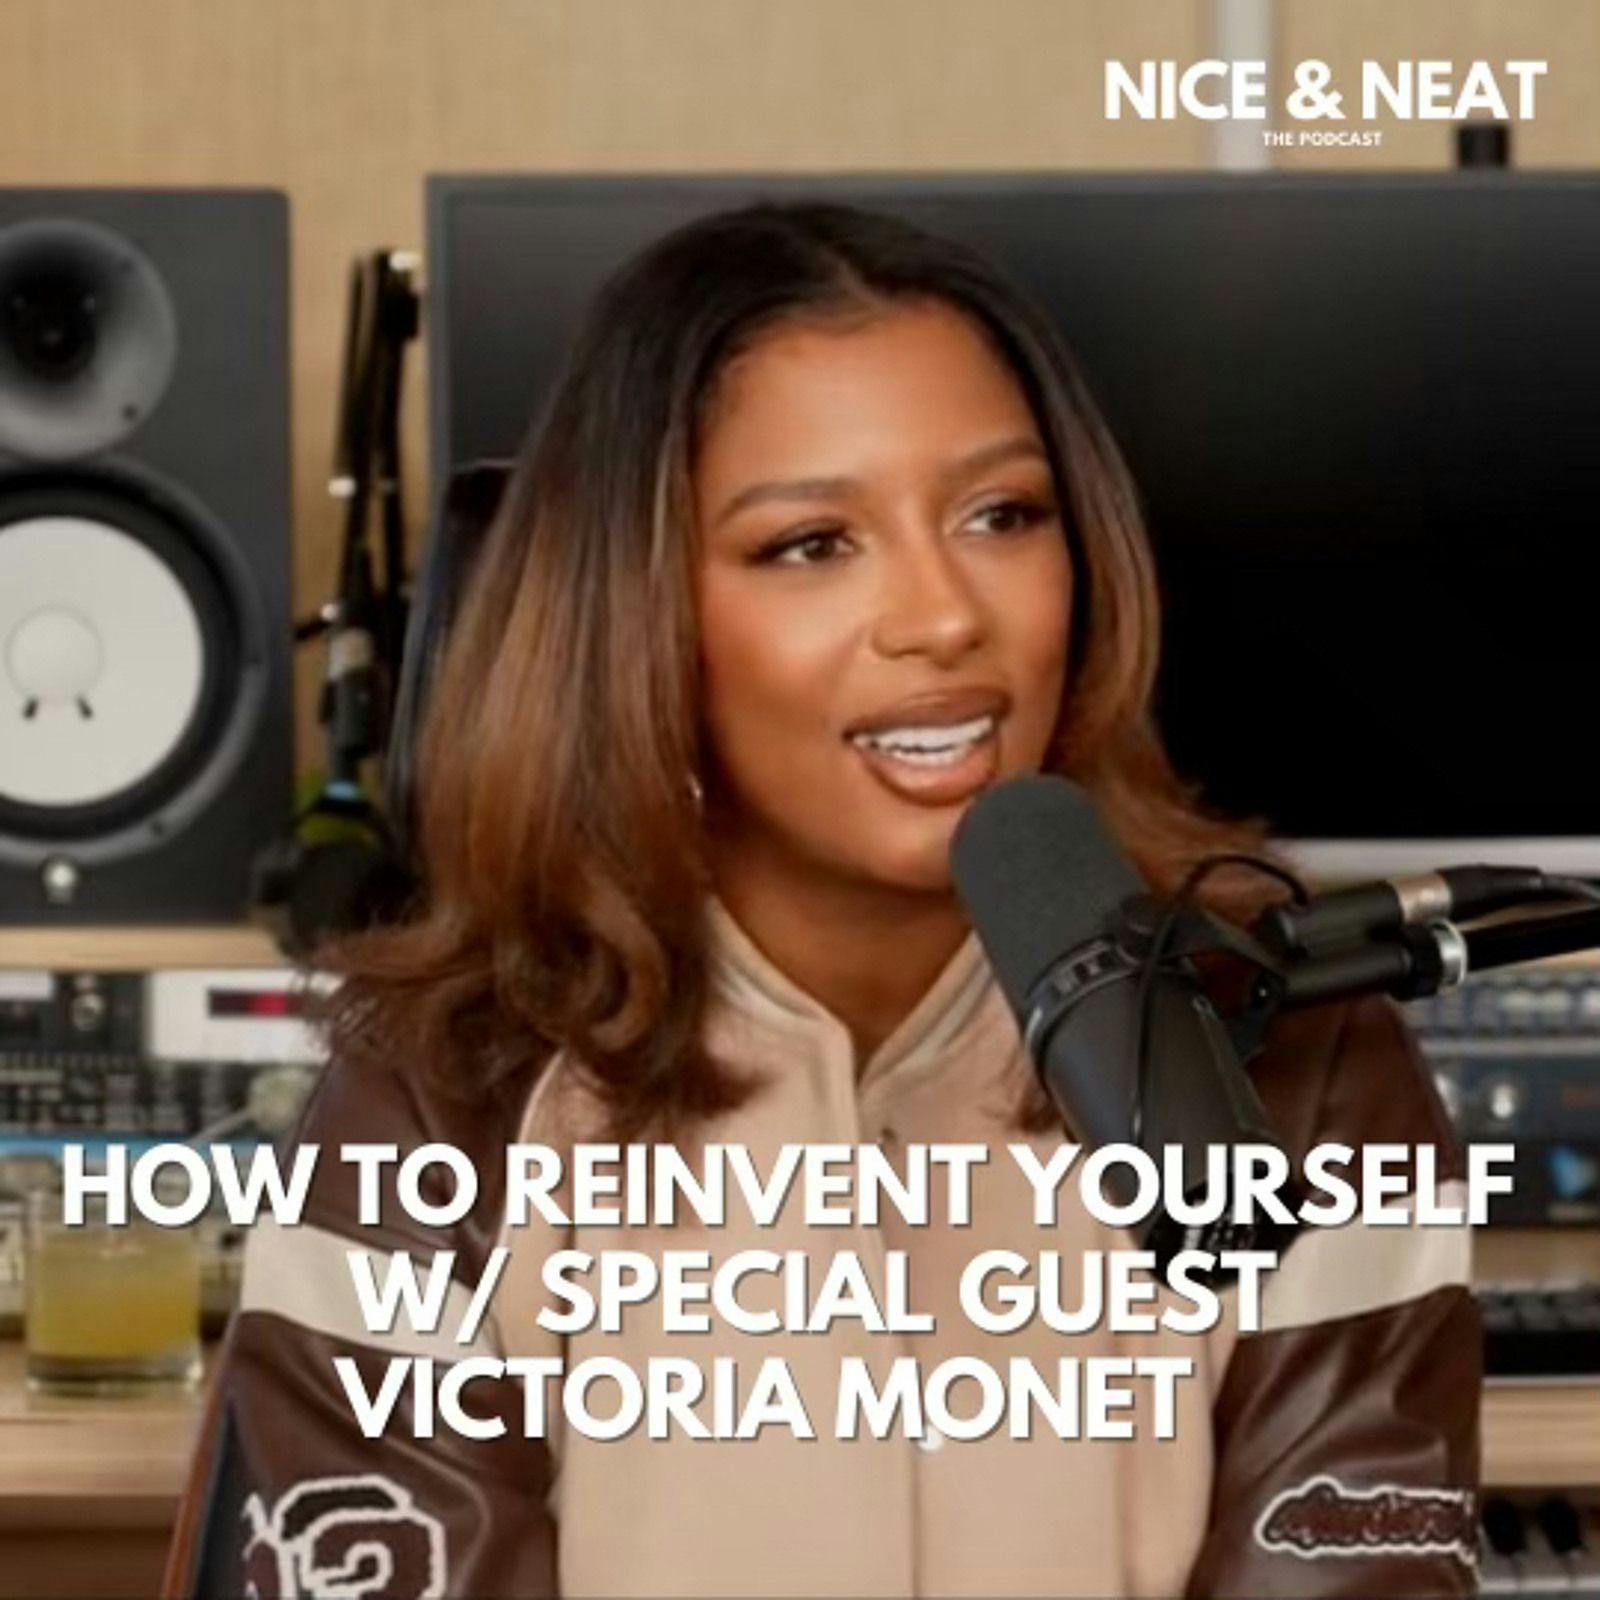 ‘HOW TO REINVENT YOURSELF W/ SPECIAL GUEST VICTORIA MONET’ (S4,EP5)